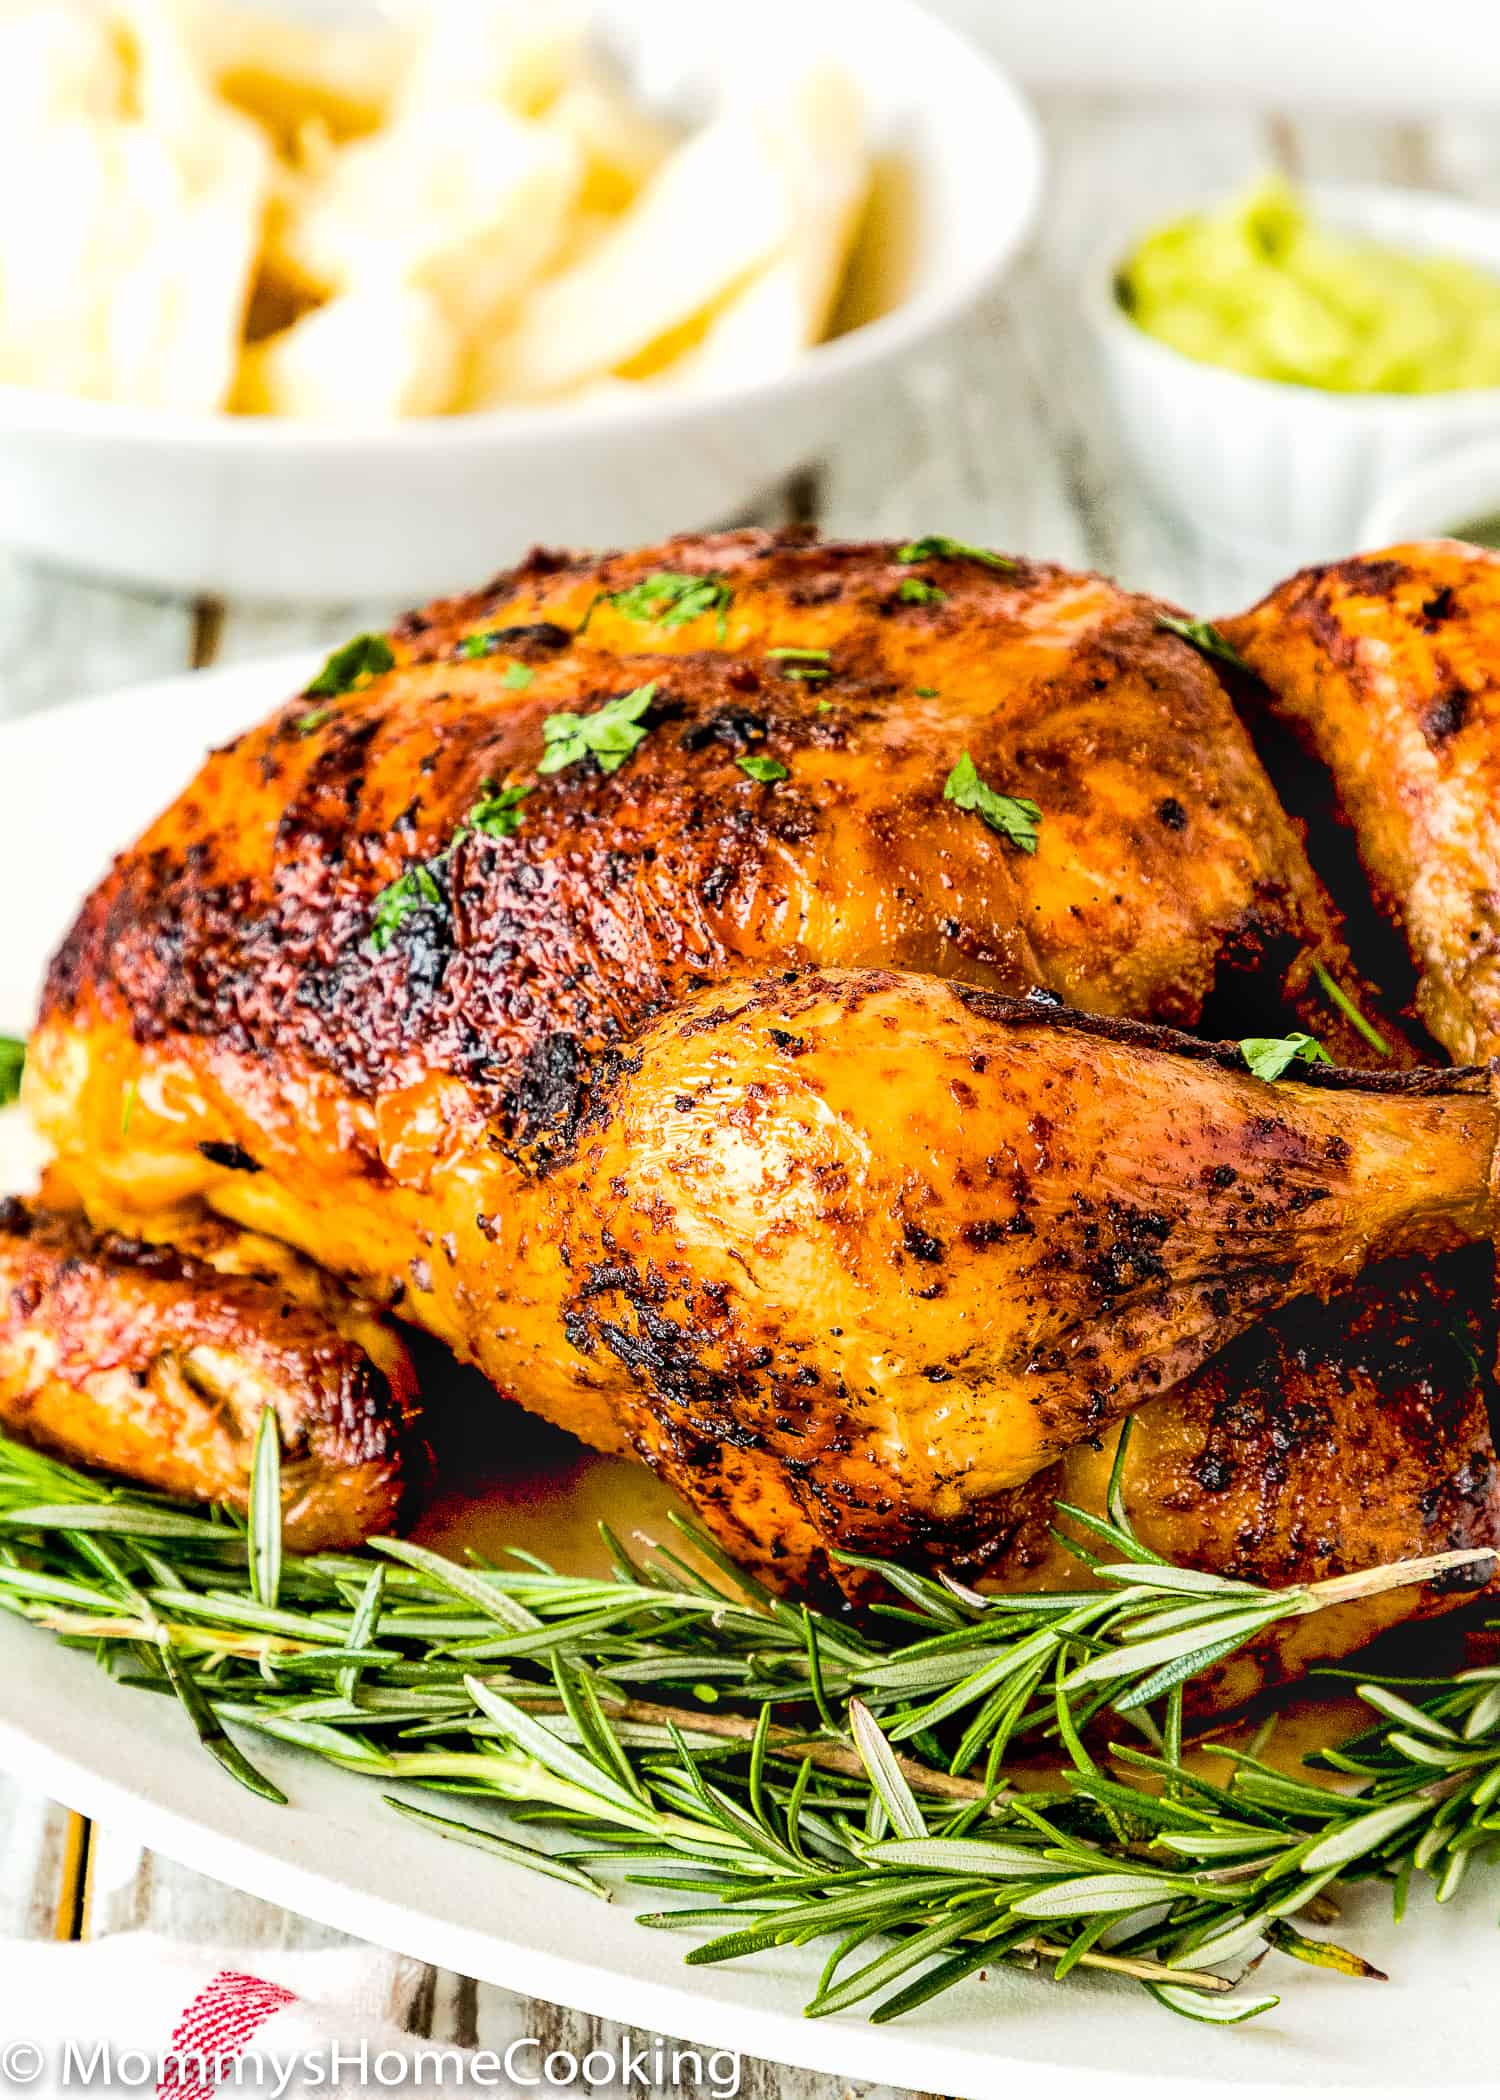 Venezuelan style roasted chicken over a plate with fresh rosemary.